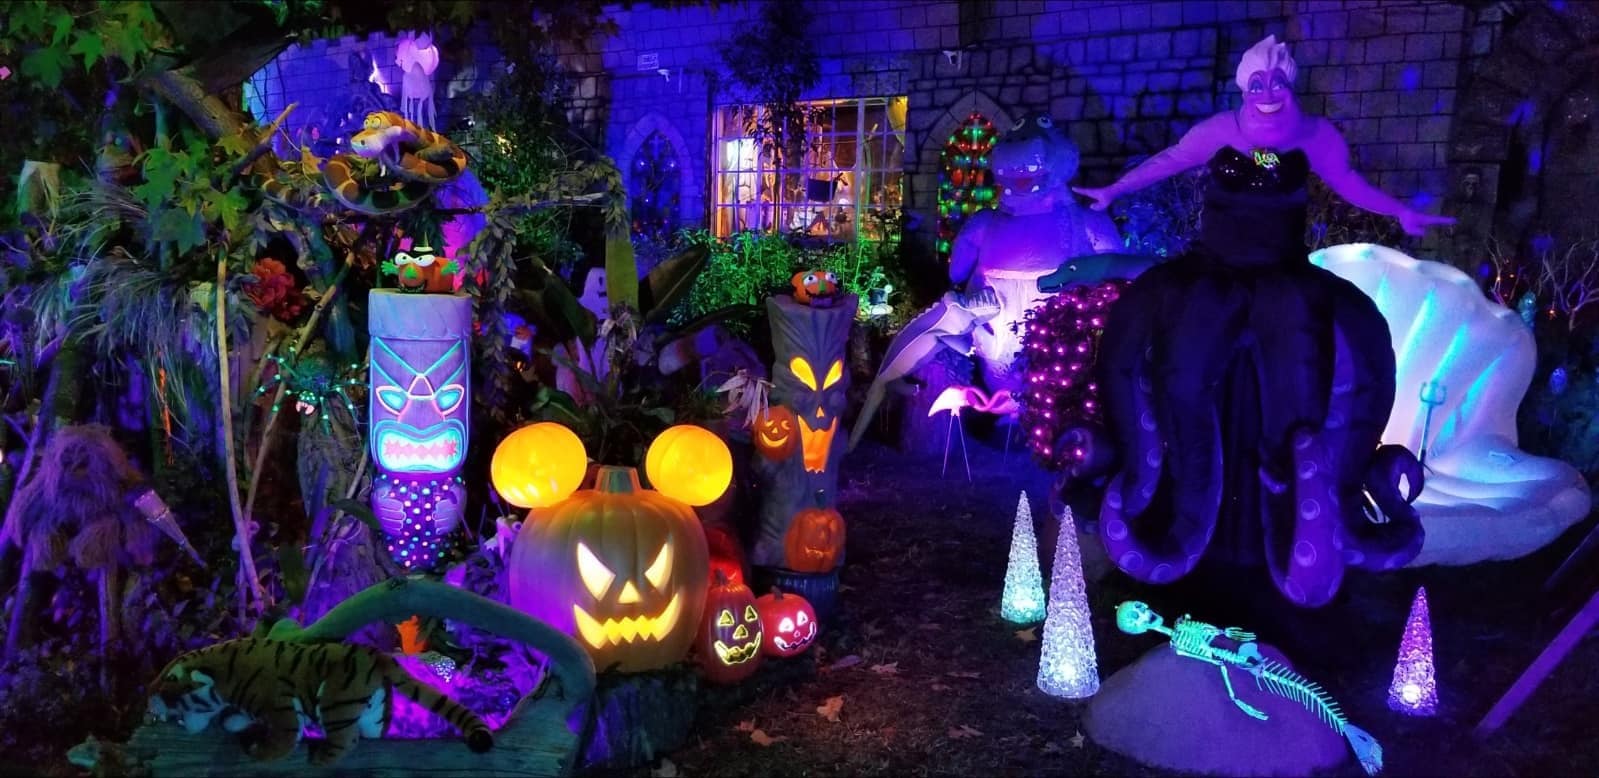 A House In Burbank Is Resurrecting Disney With An Insane Halloween